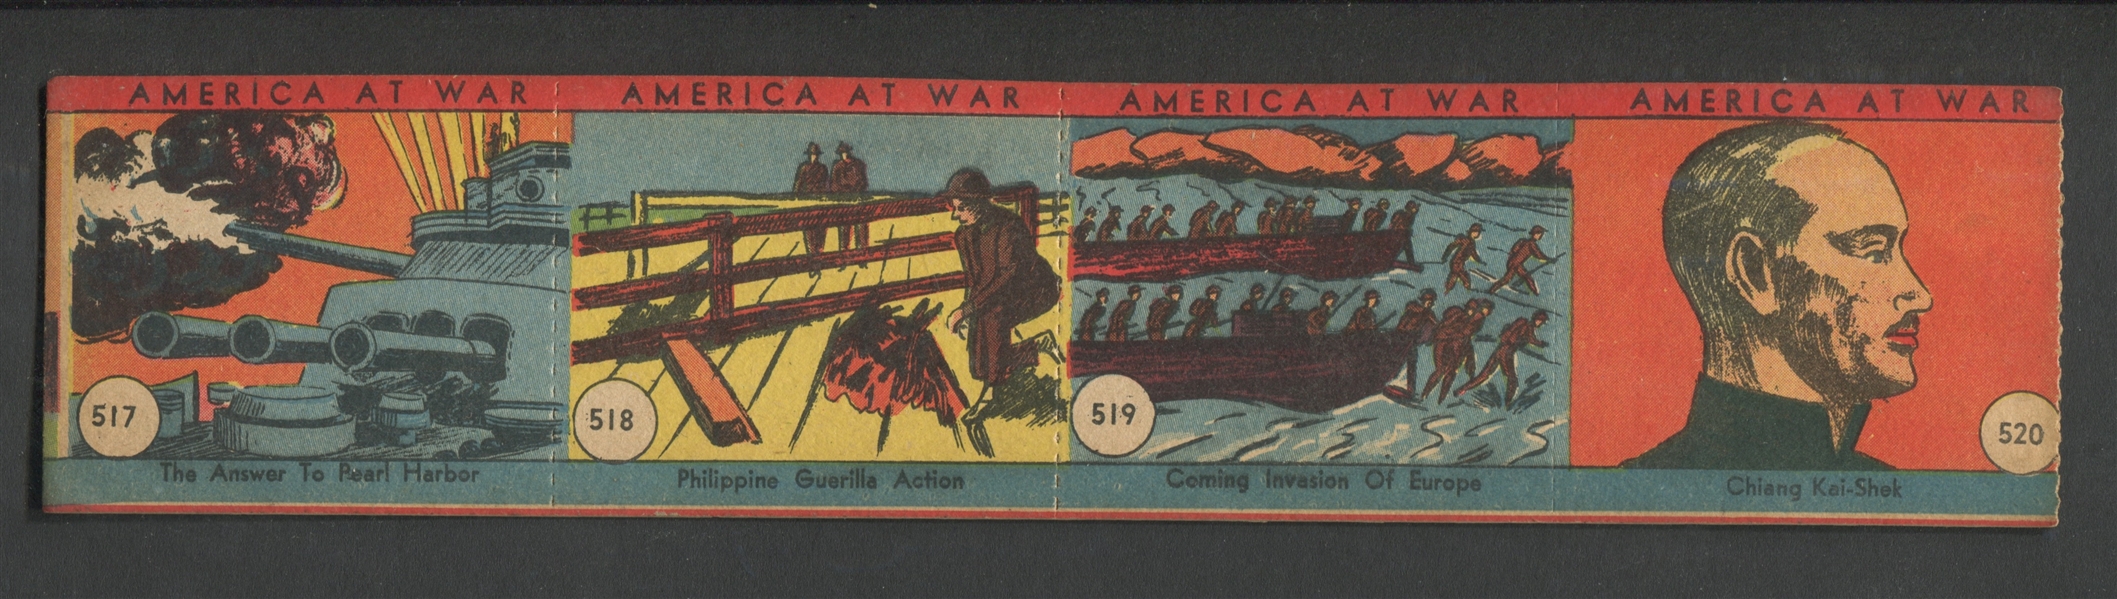 R12 America At War Strip Card Lot of (64) Cards in Four Card Strips